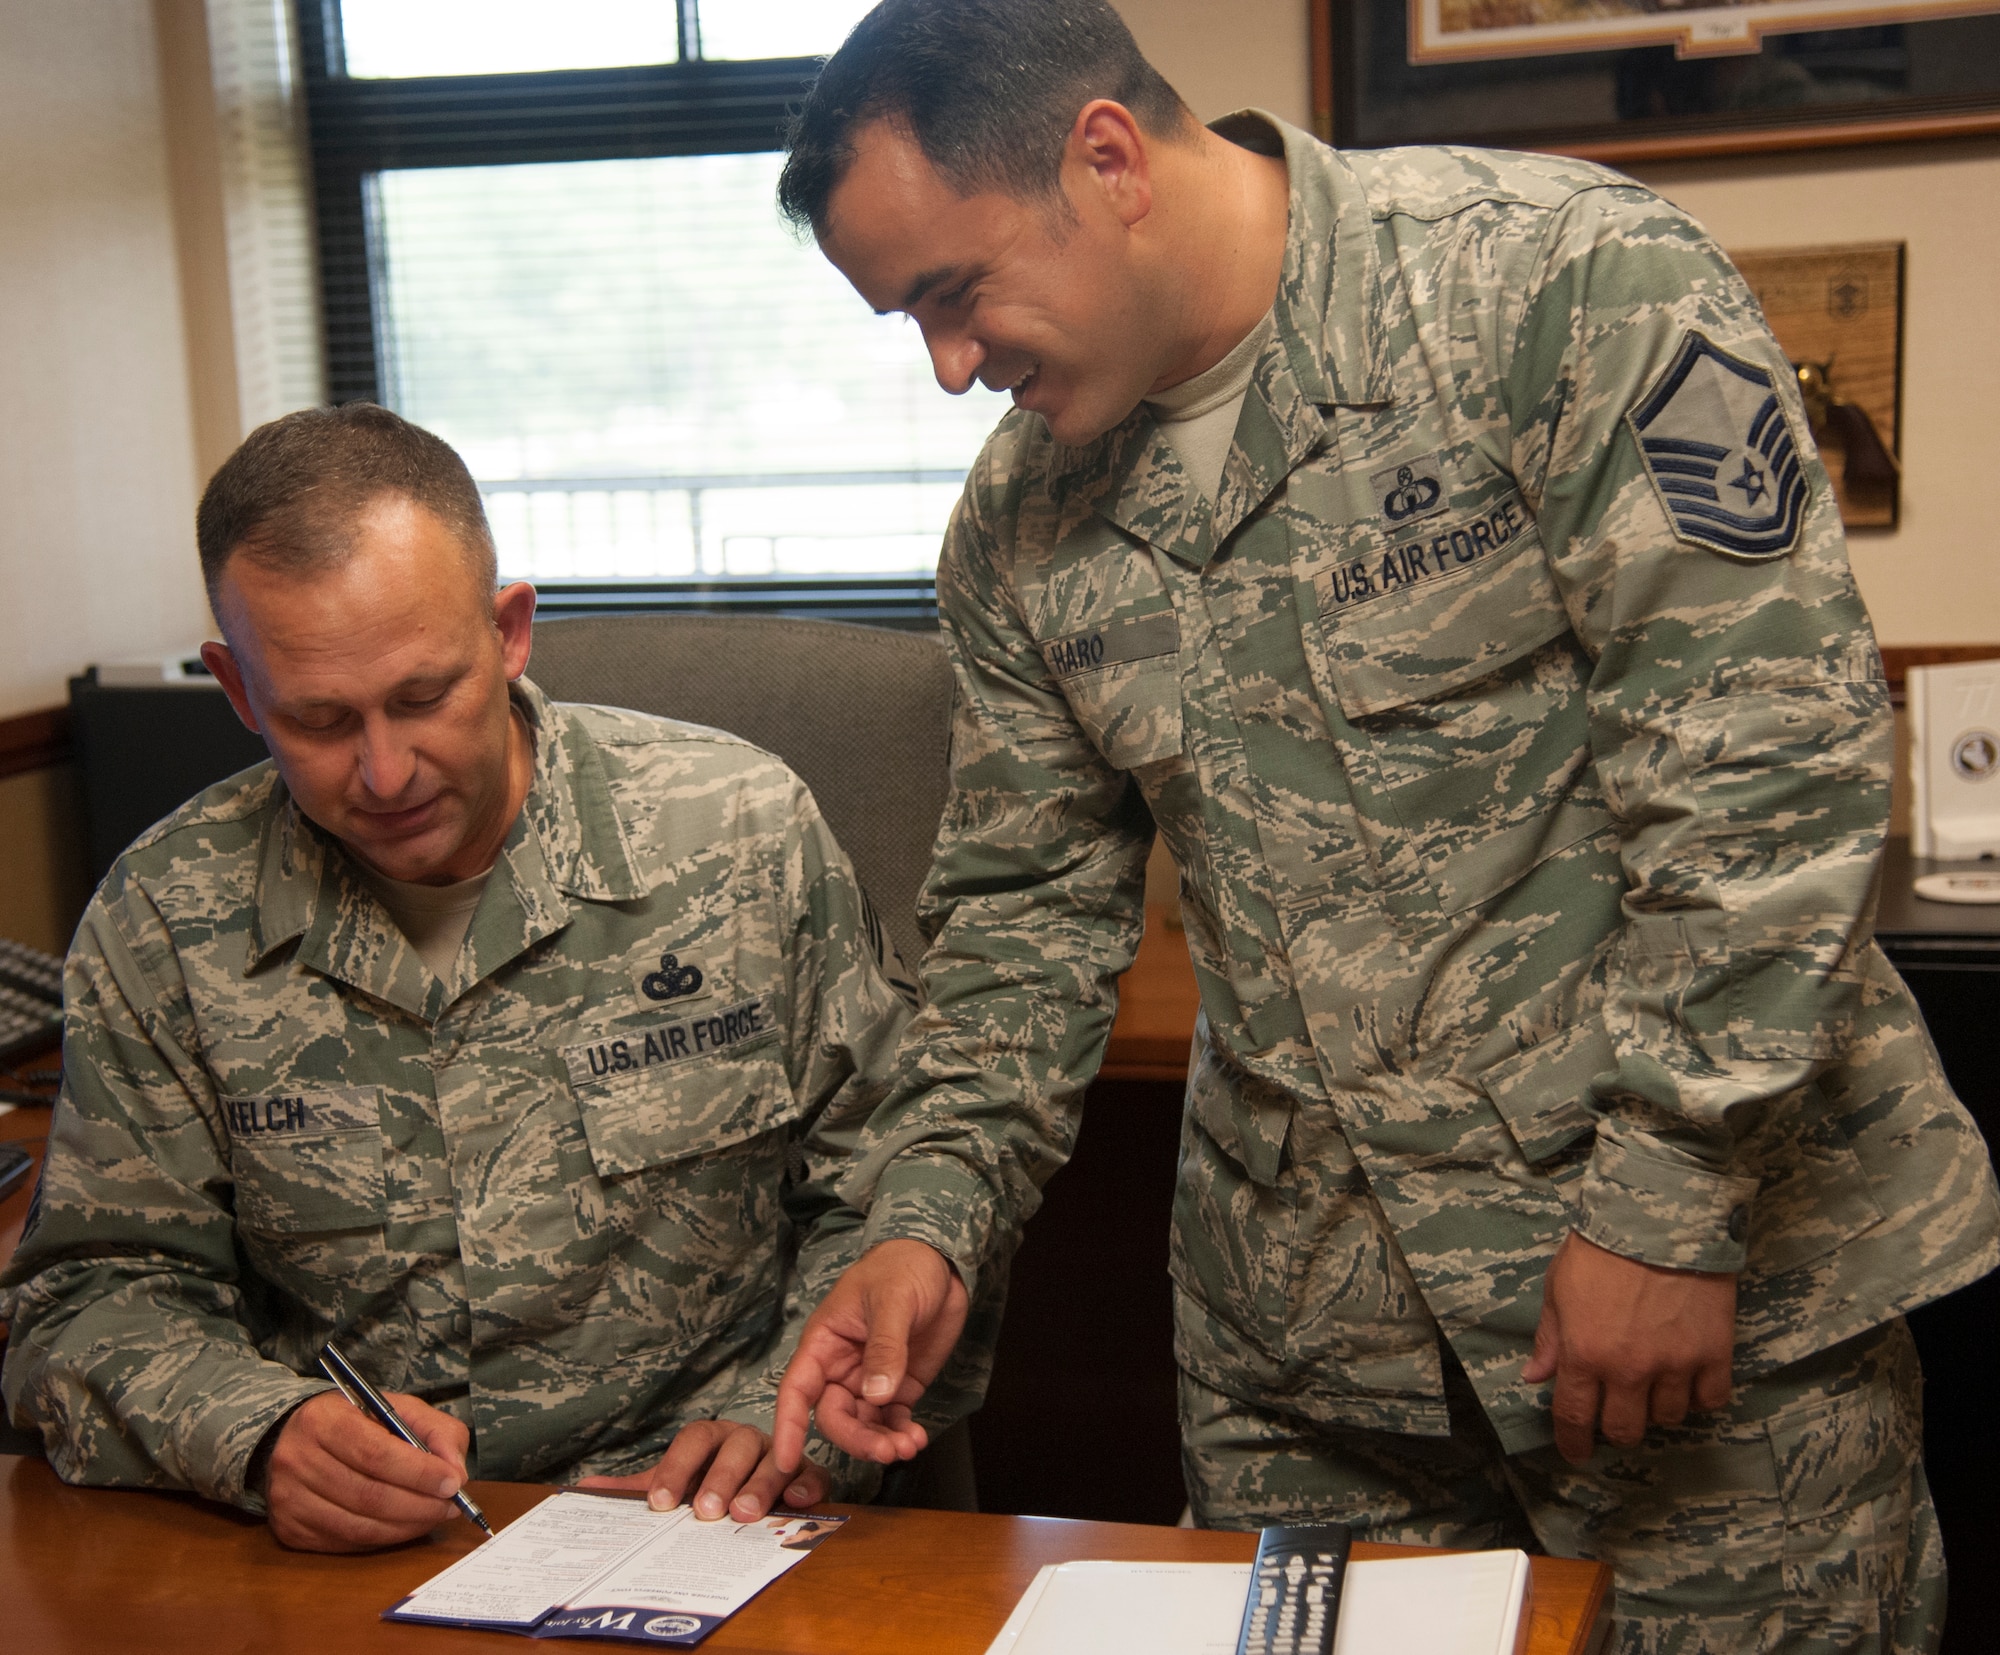 U.S. Air Force Chief Master Sgt. David Kelch, 23d Wing command chief, signs up for Air Force Sergeants Association (AFSA) Chapter 460 membership with the assistance of Master Sgt. Steven Haro, Chapter 460 president, July 30, 2014 at Moody Air Force Base, Ga. The chapter had only 300 active members in 2012, but membership peaked to more than 1,000 members as of September 2014. (U.S. Air Force photo by 2nd Lt. Brianca Williams/Released)